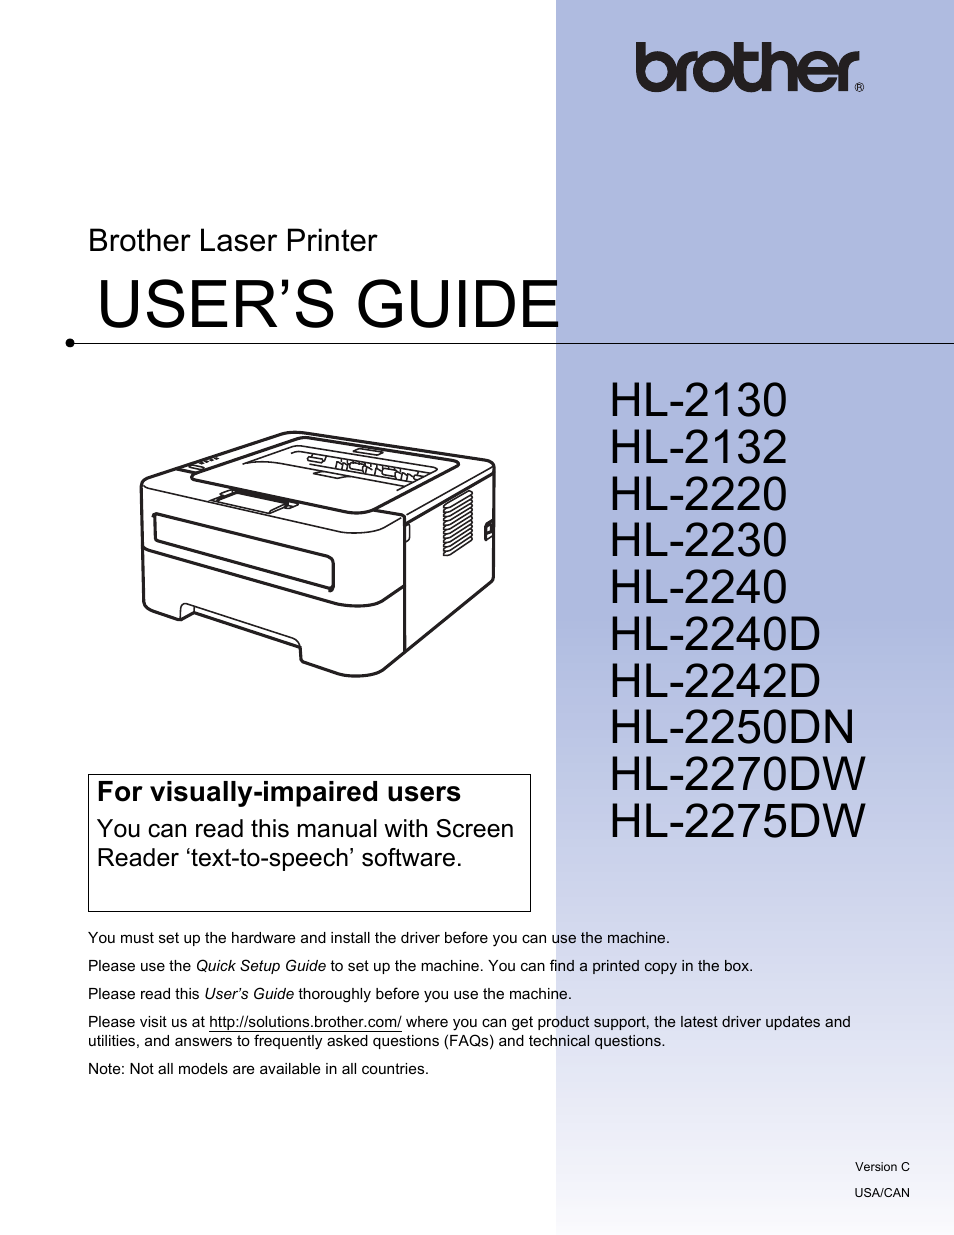 Brother HL 2270DW User Manual | 150 pages | Also for: HL-2275DW, HL 2220, HL  2240D, HL-2230, HL-2240, HL-2130, HL-2132, HL-2242D, HL-2250DN